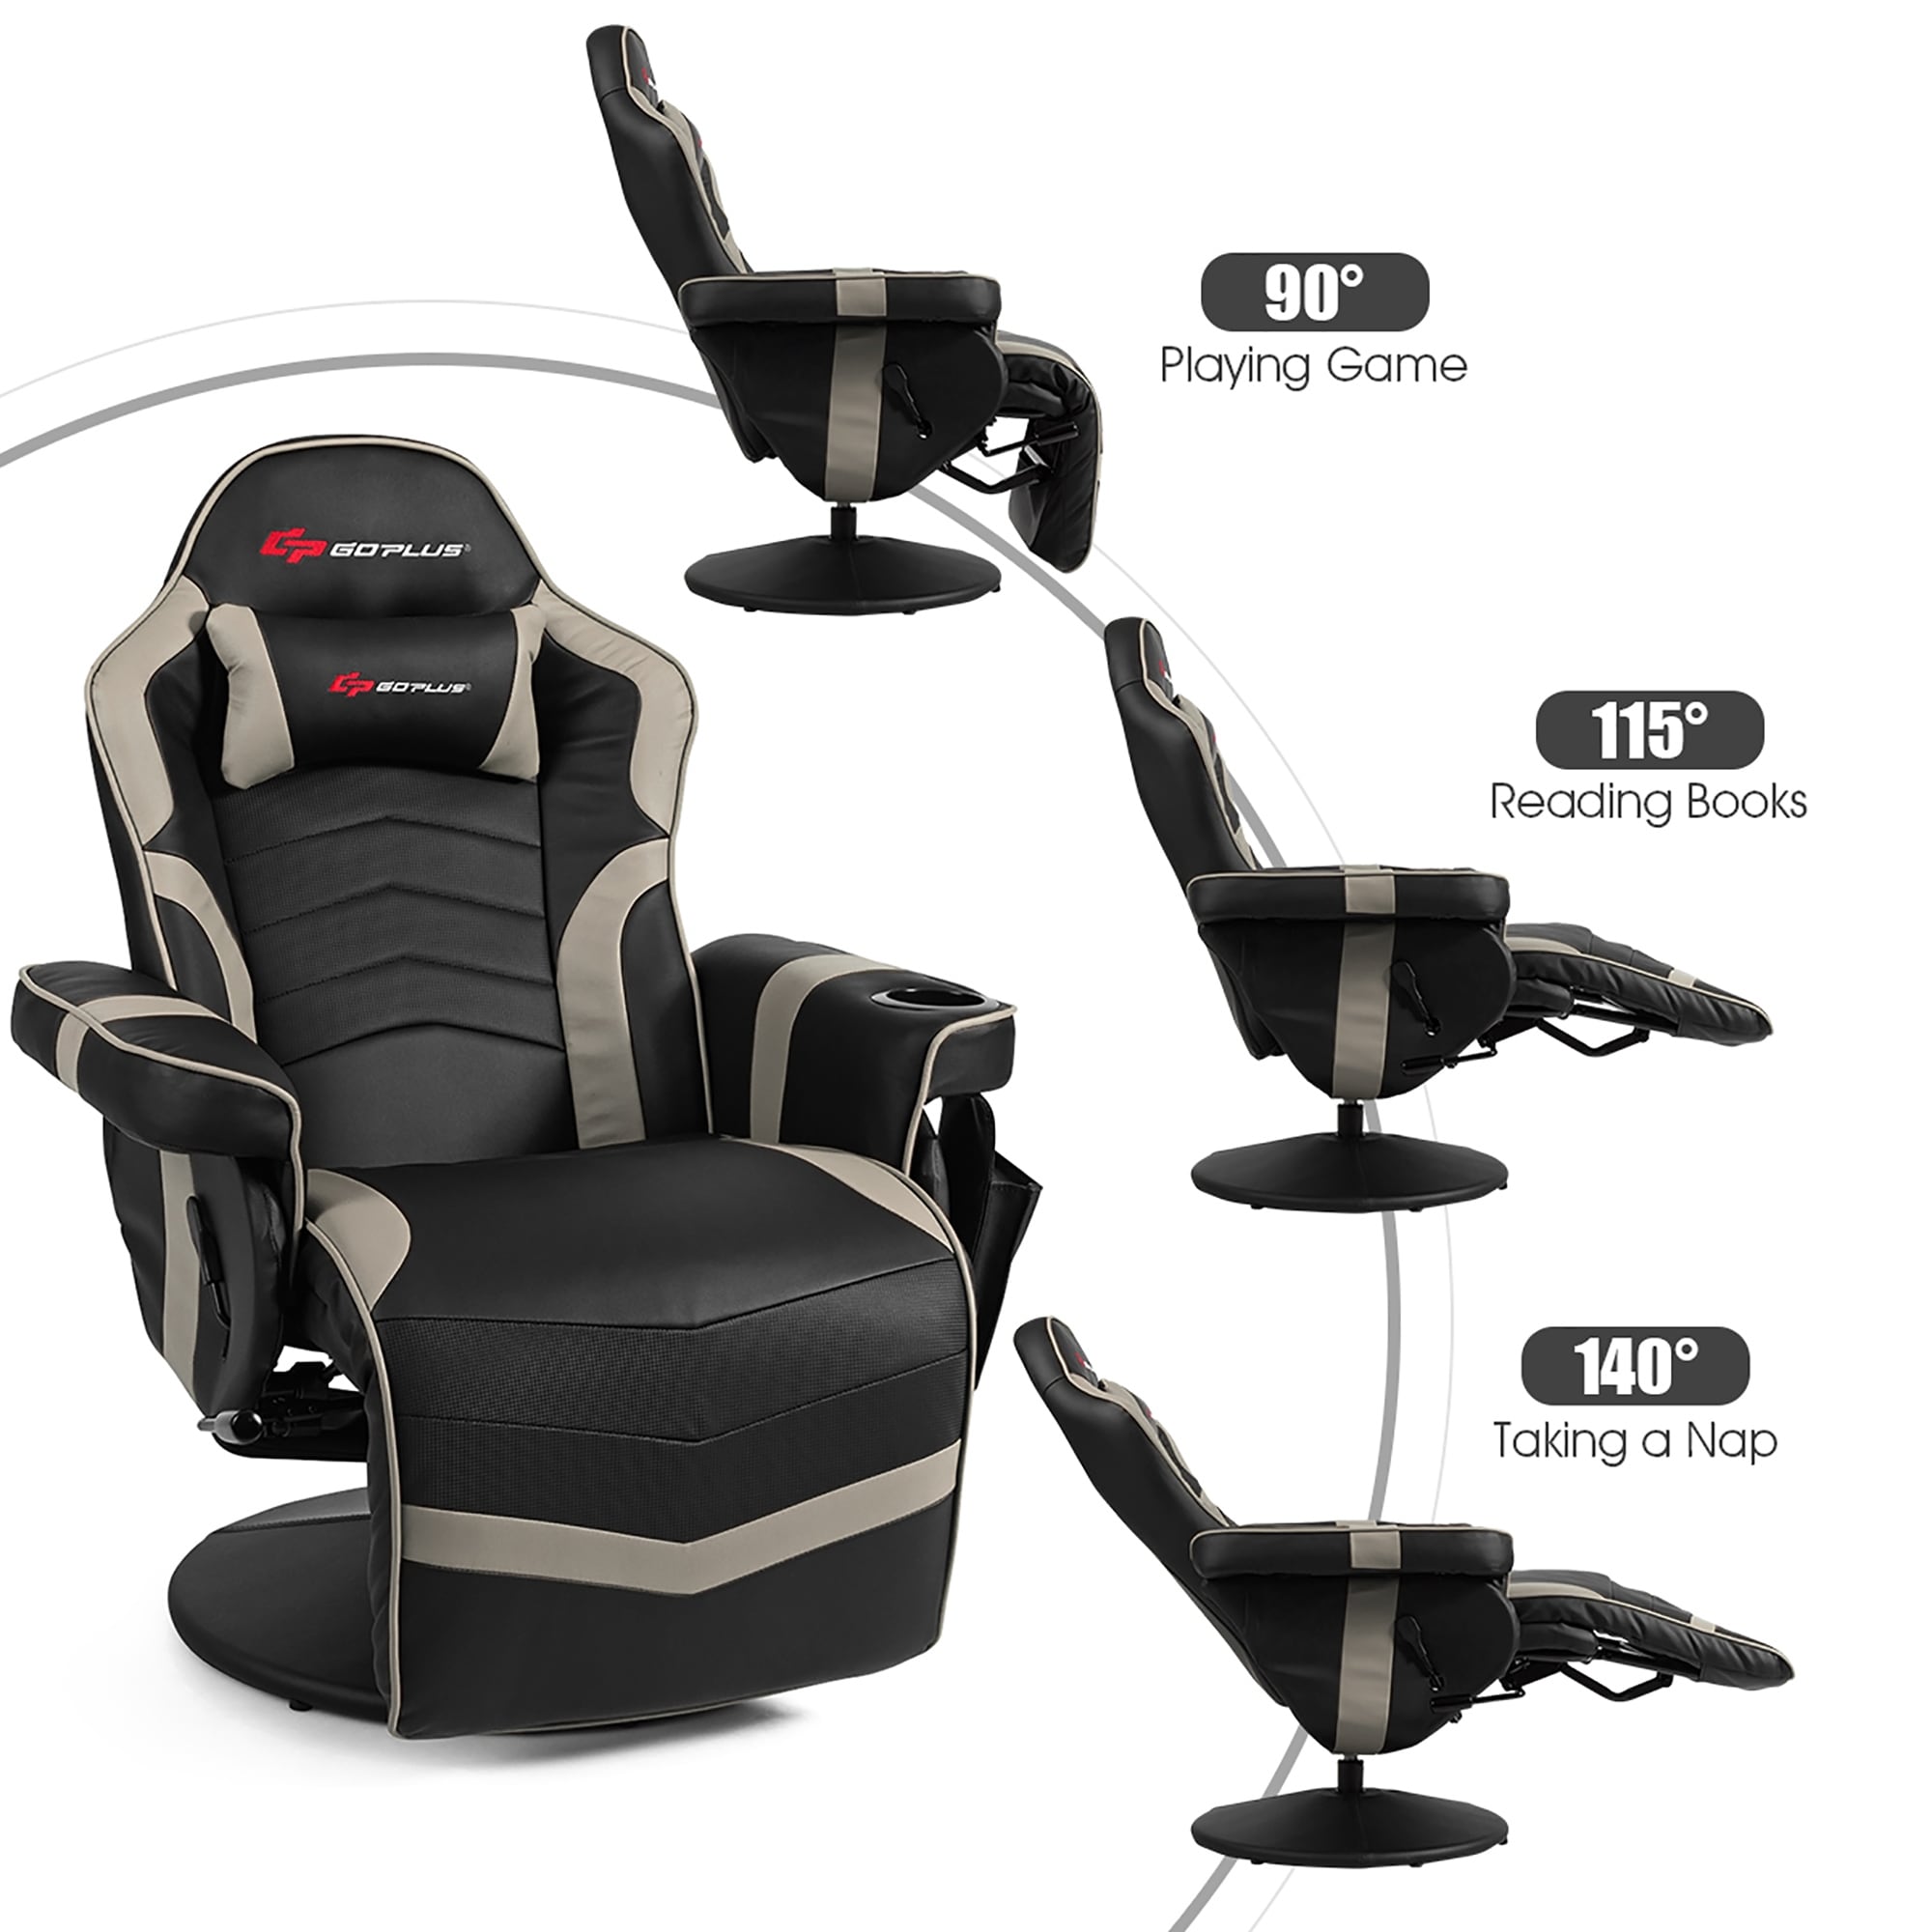 https://ak1.ostkcdn.com/images/products/is/images/direct/f807708849025d42d1538bc4885e849f9f68c505/Goplus-Massage-Gaming-Recliner-Reclining-Racing-Chair-Swivel.jpg